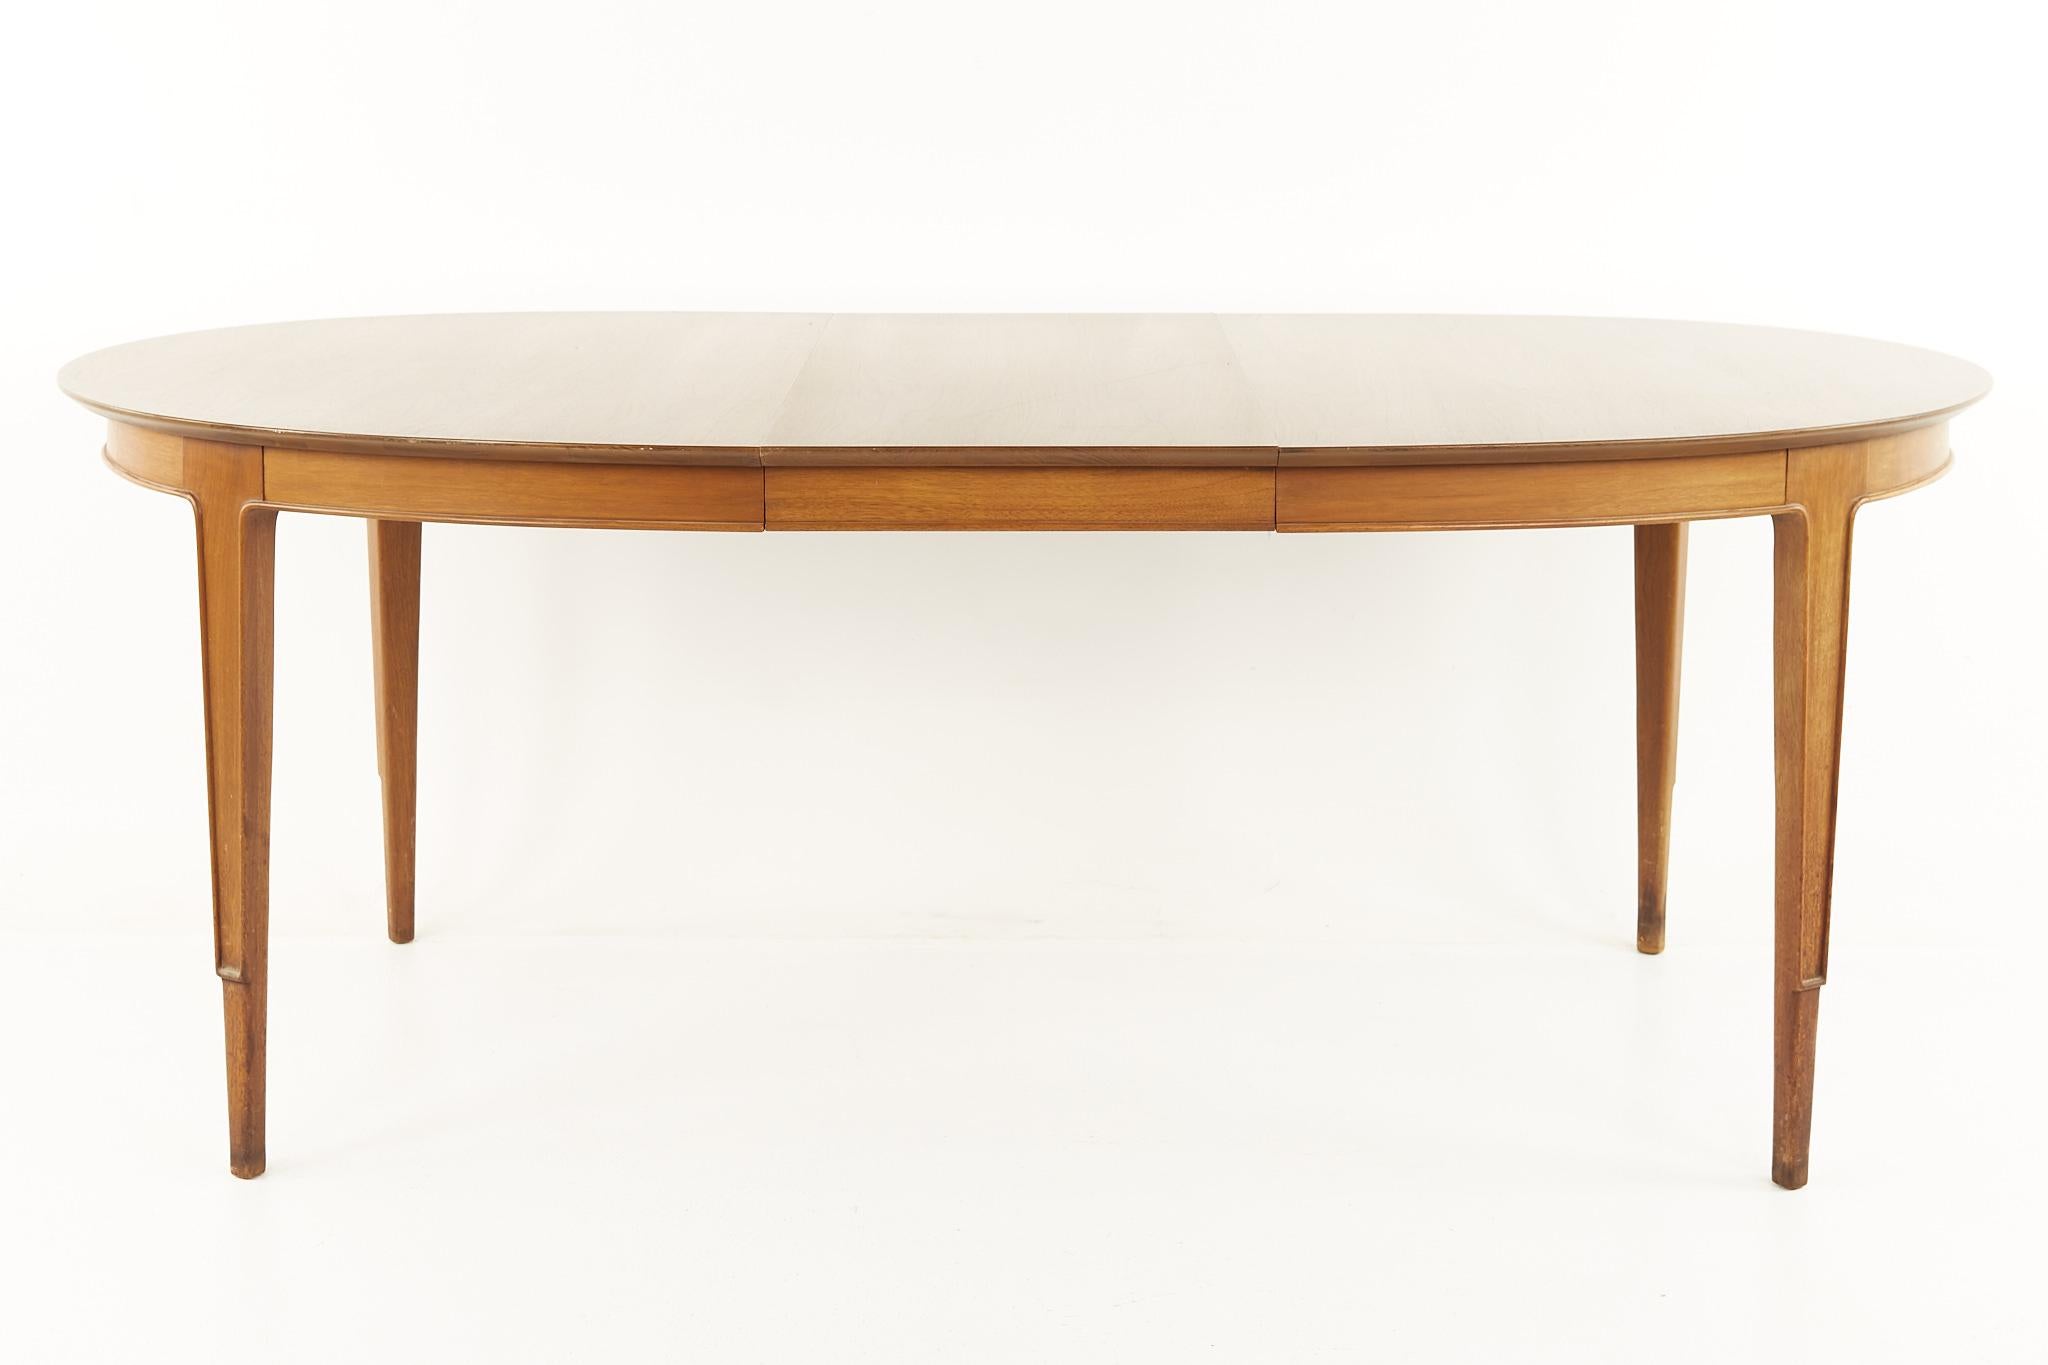 Wood Mount Airy Janus Mid Century Dining Table with 2 Leaves